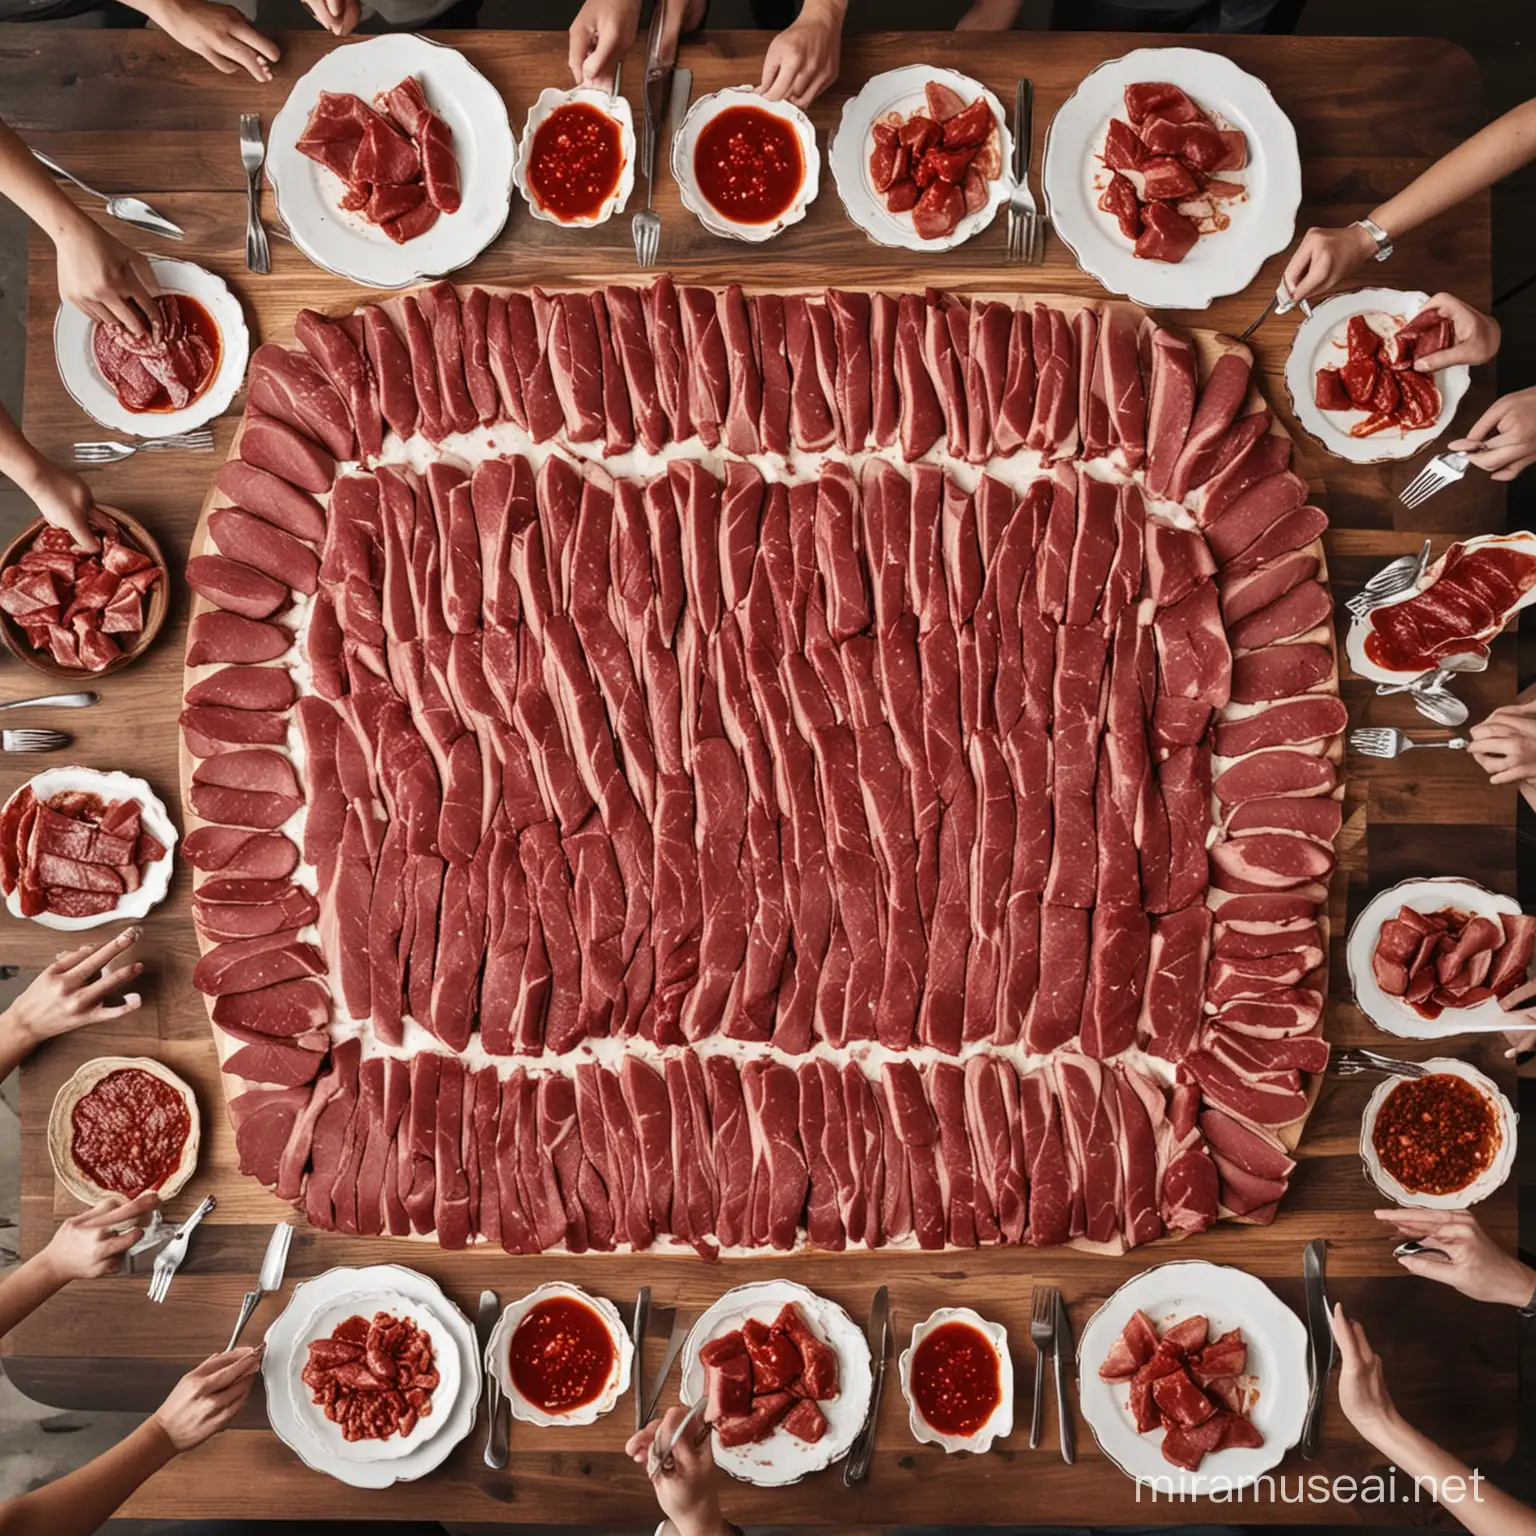 Abundant Display of Meat A Transformation from Red to White